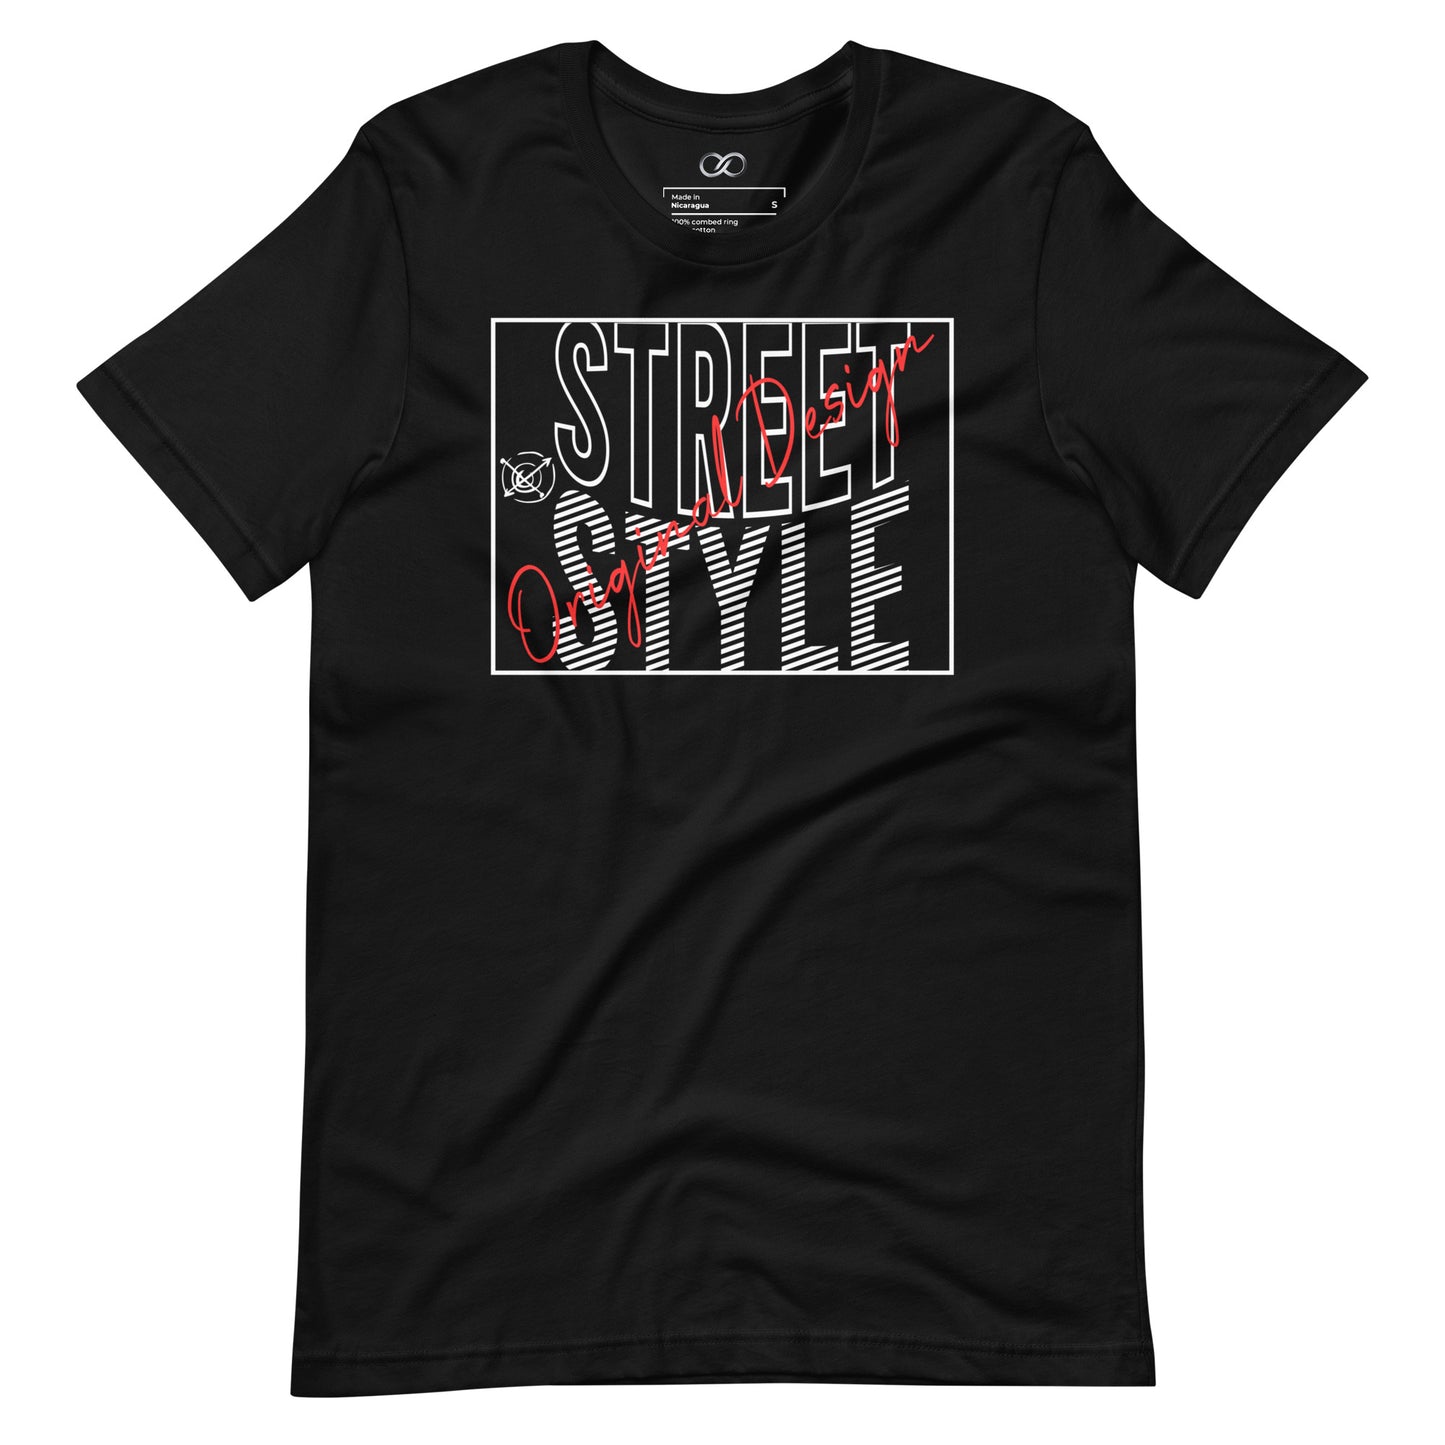 A black unisex staple t-shirt laid flat, showcasing a bold graphic print with the words 'STREET STYLE' in a large, stylized font in white and red colors, with a small graphic of sunglasses on the upper left.